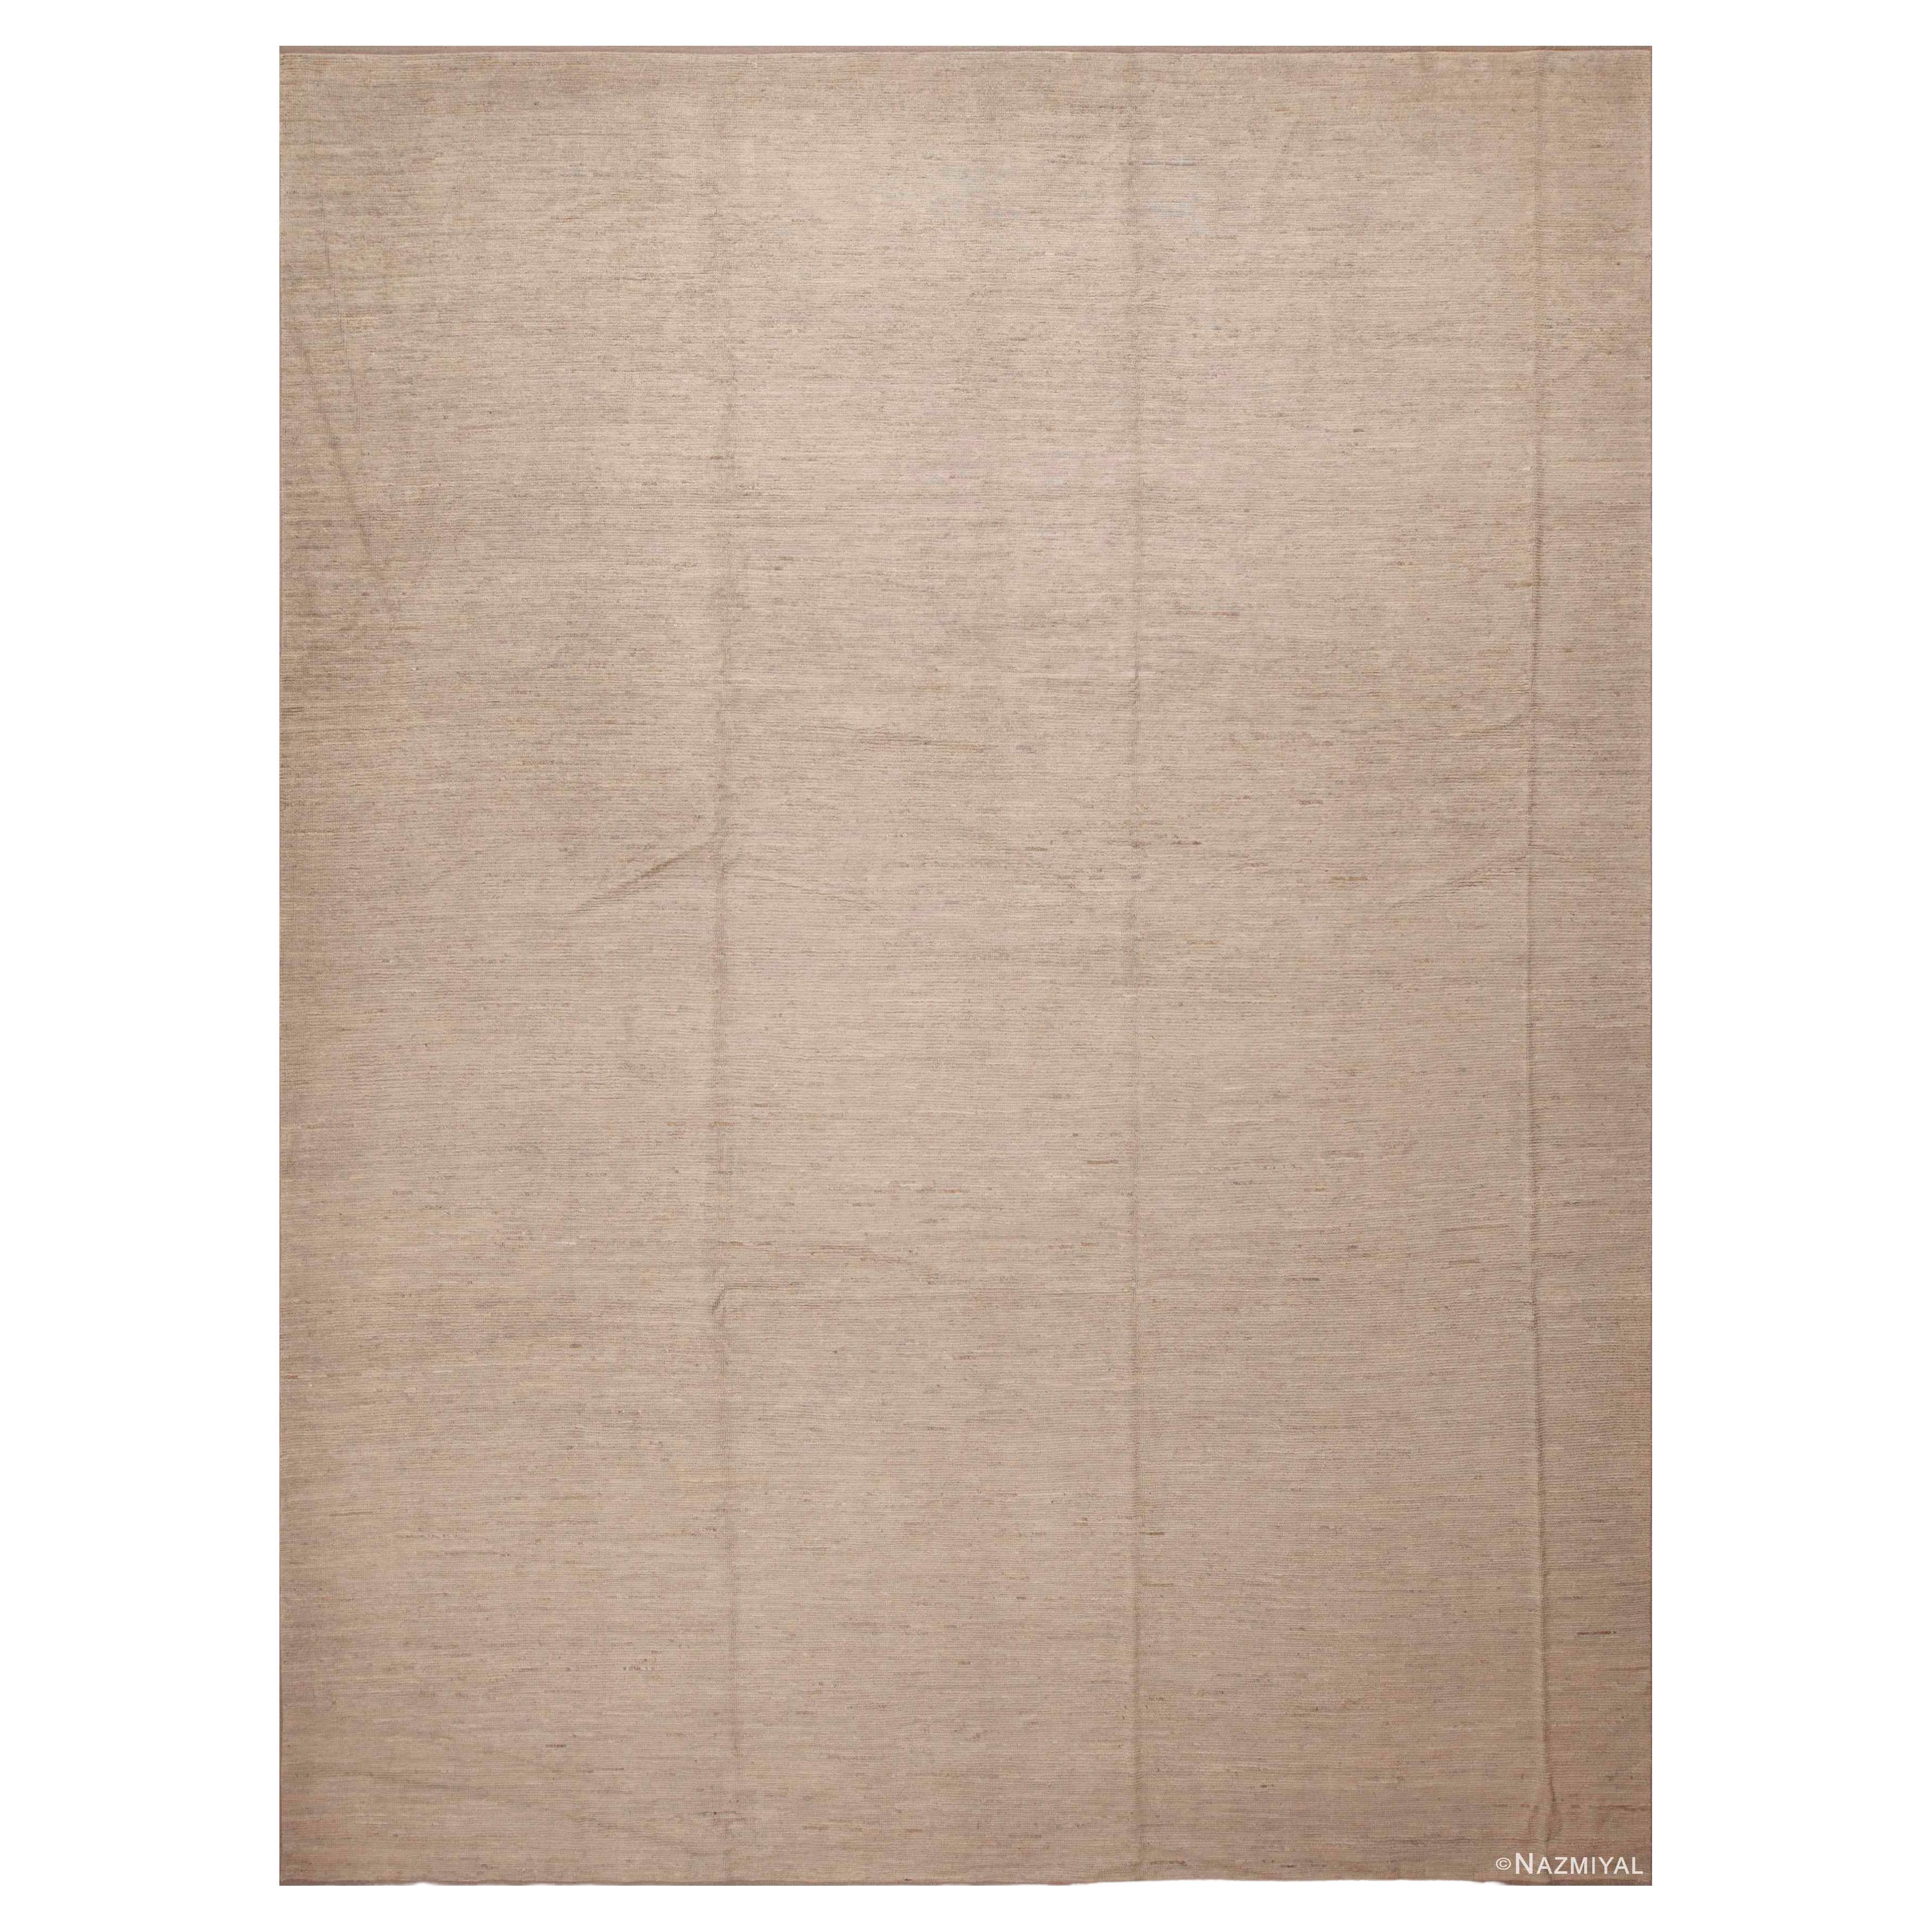 Nazmiyal Collection Abstract Minimalist Modern Room Size Area Rug 11' x 15' For Sale